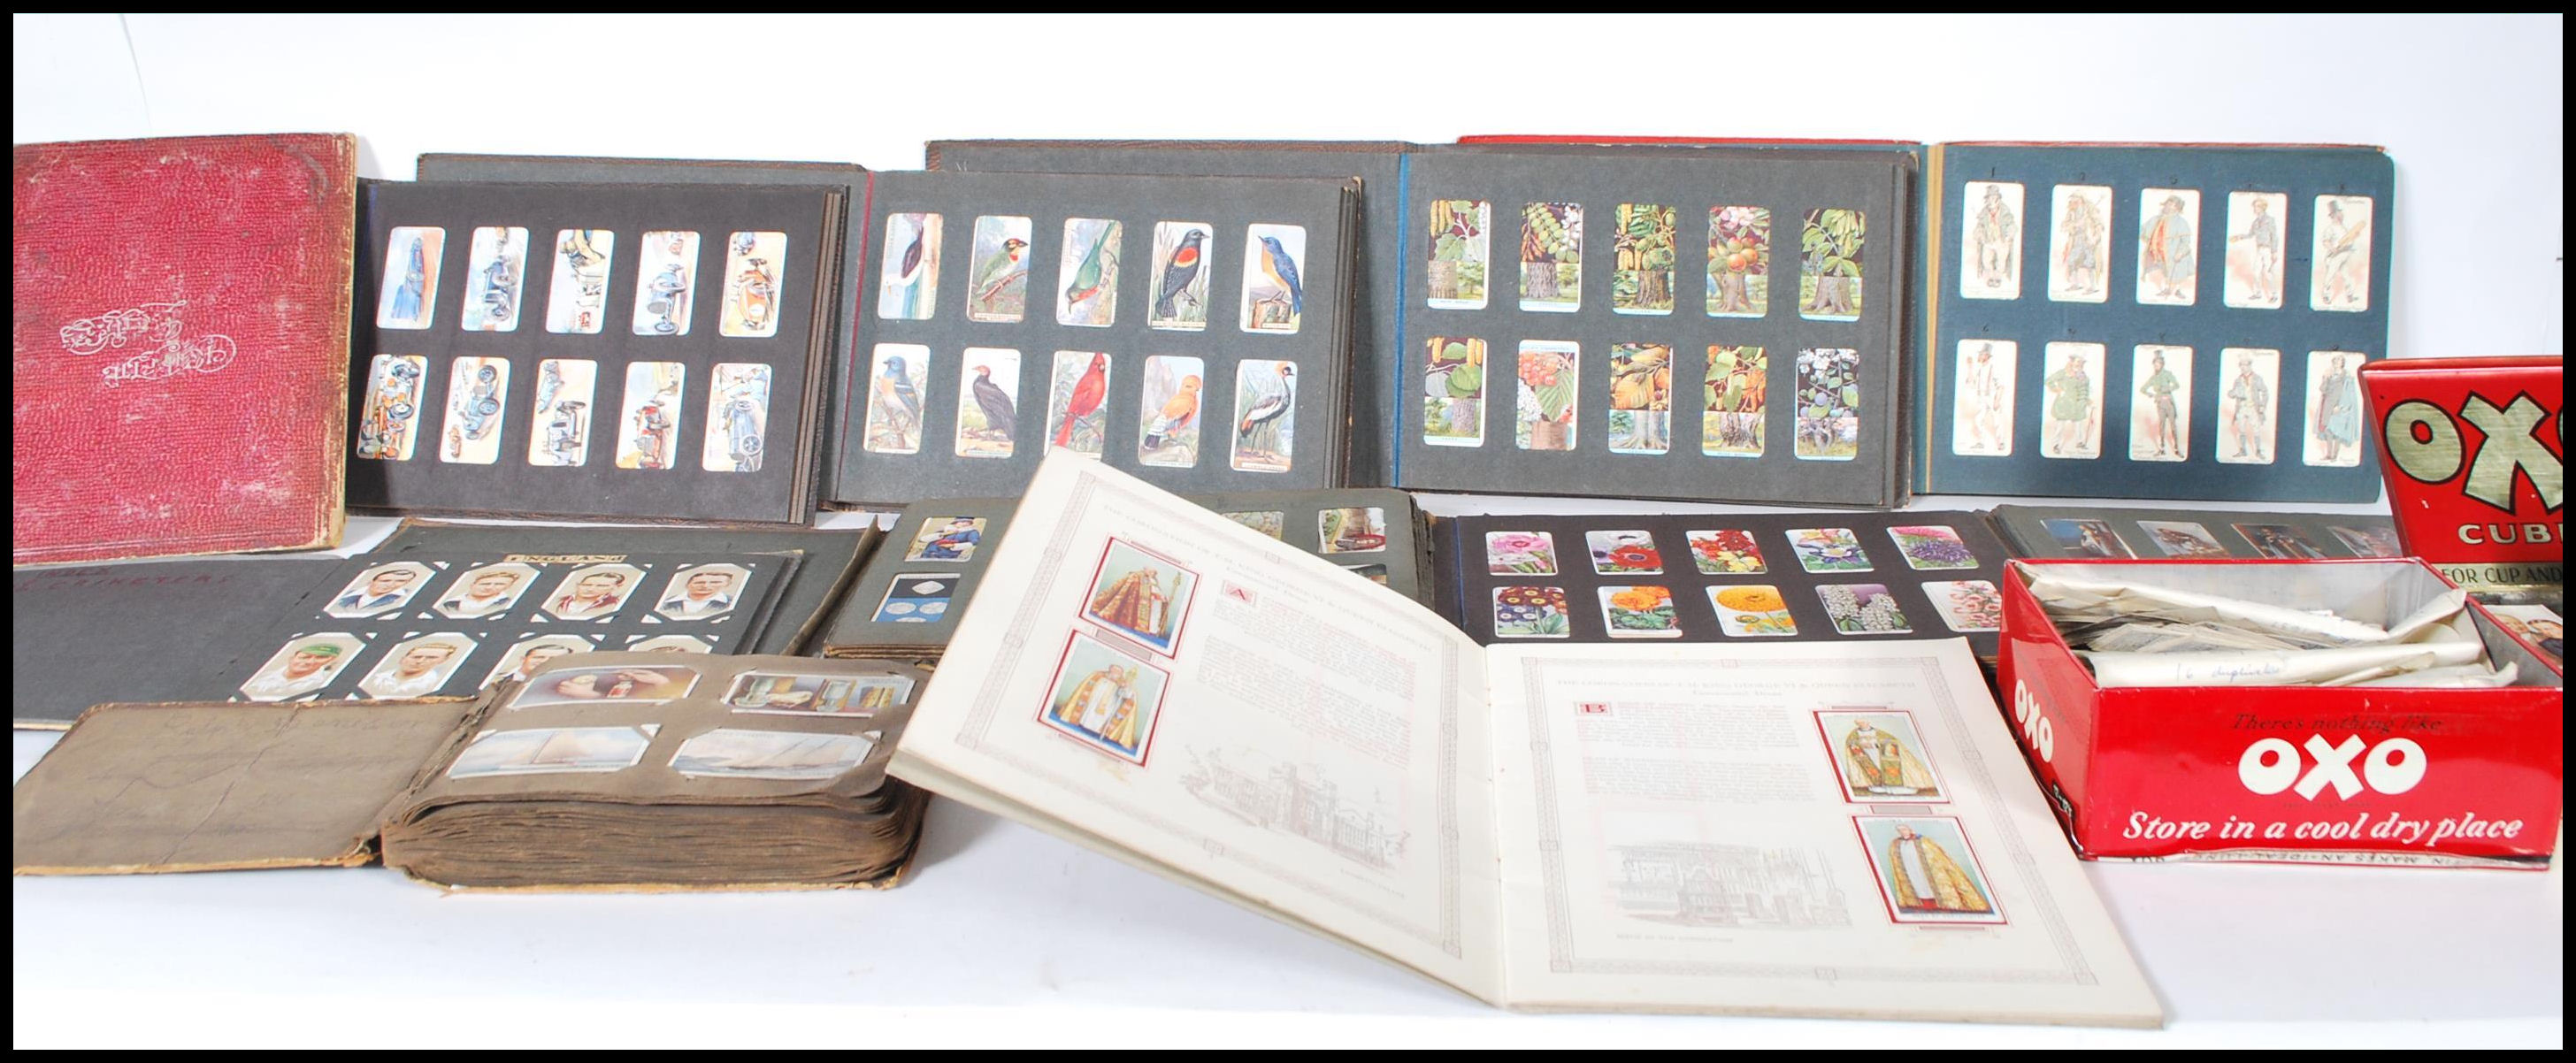 A collection of vintage trade giveaway cigarette cards dating from the early 20th Century to include